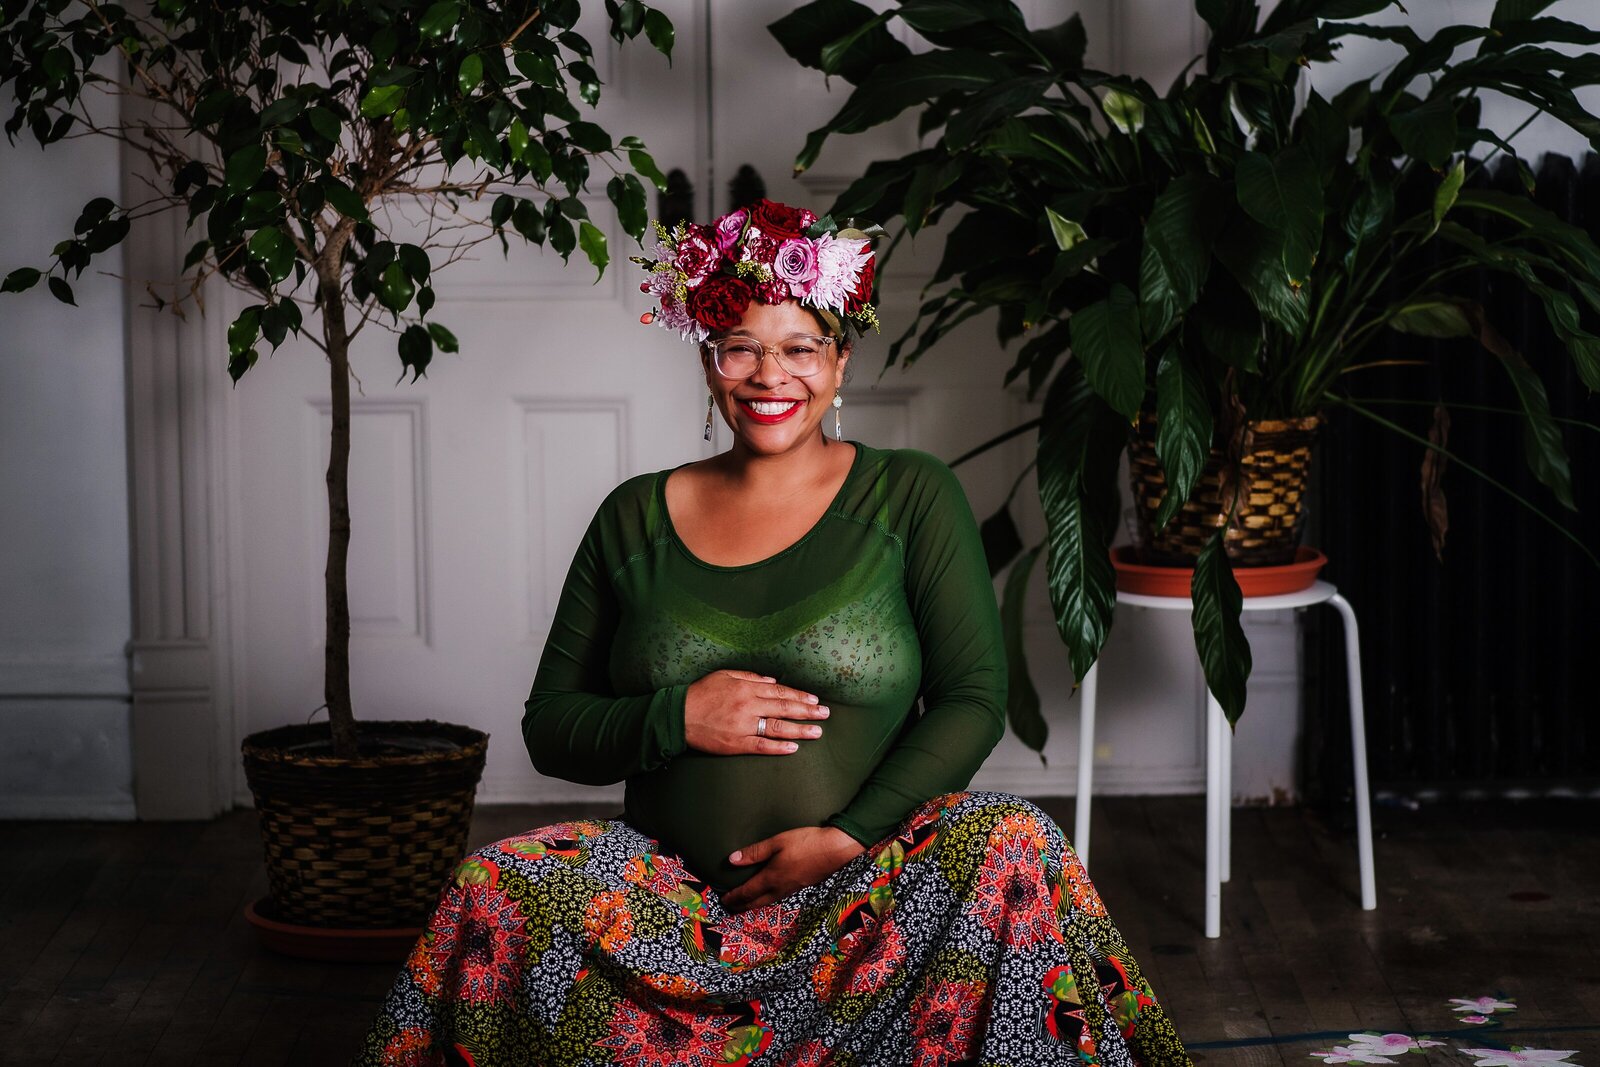 Mom in flower crown and colorful skirt, surrounded by plants holding belly and smiling. Maternity photo